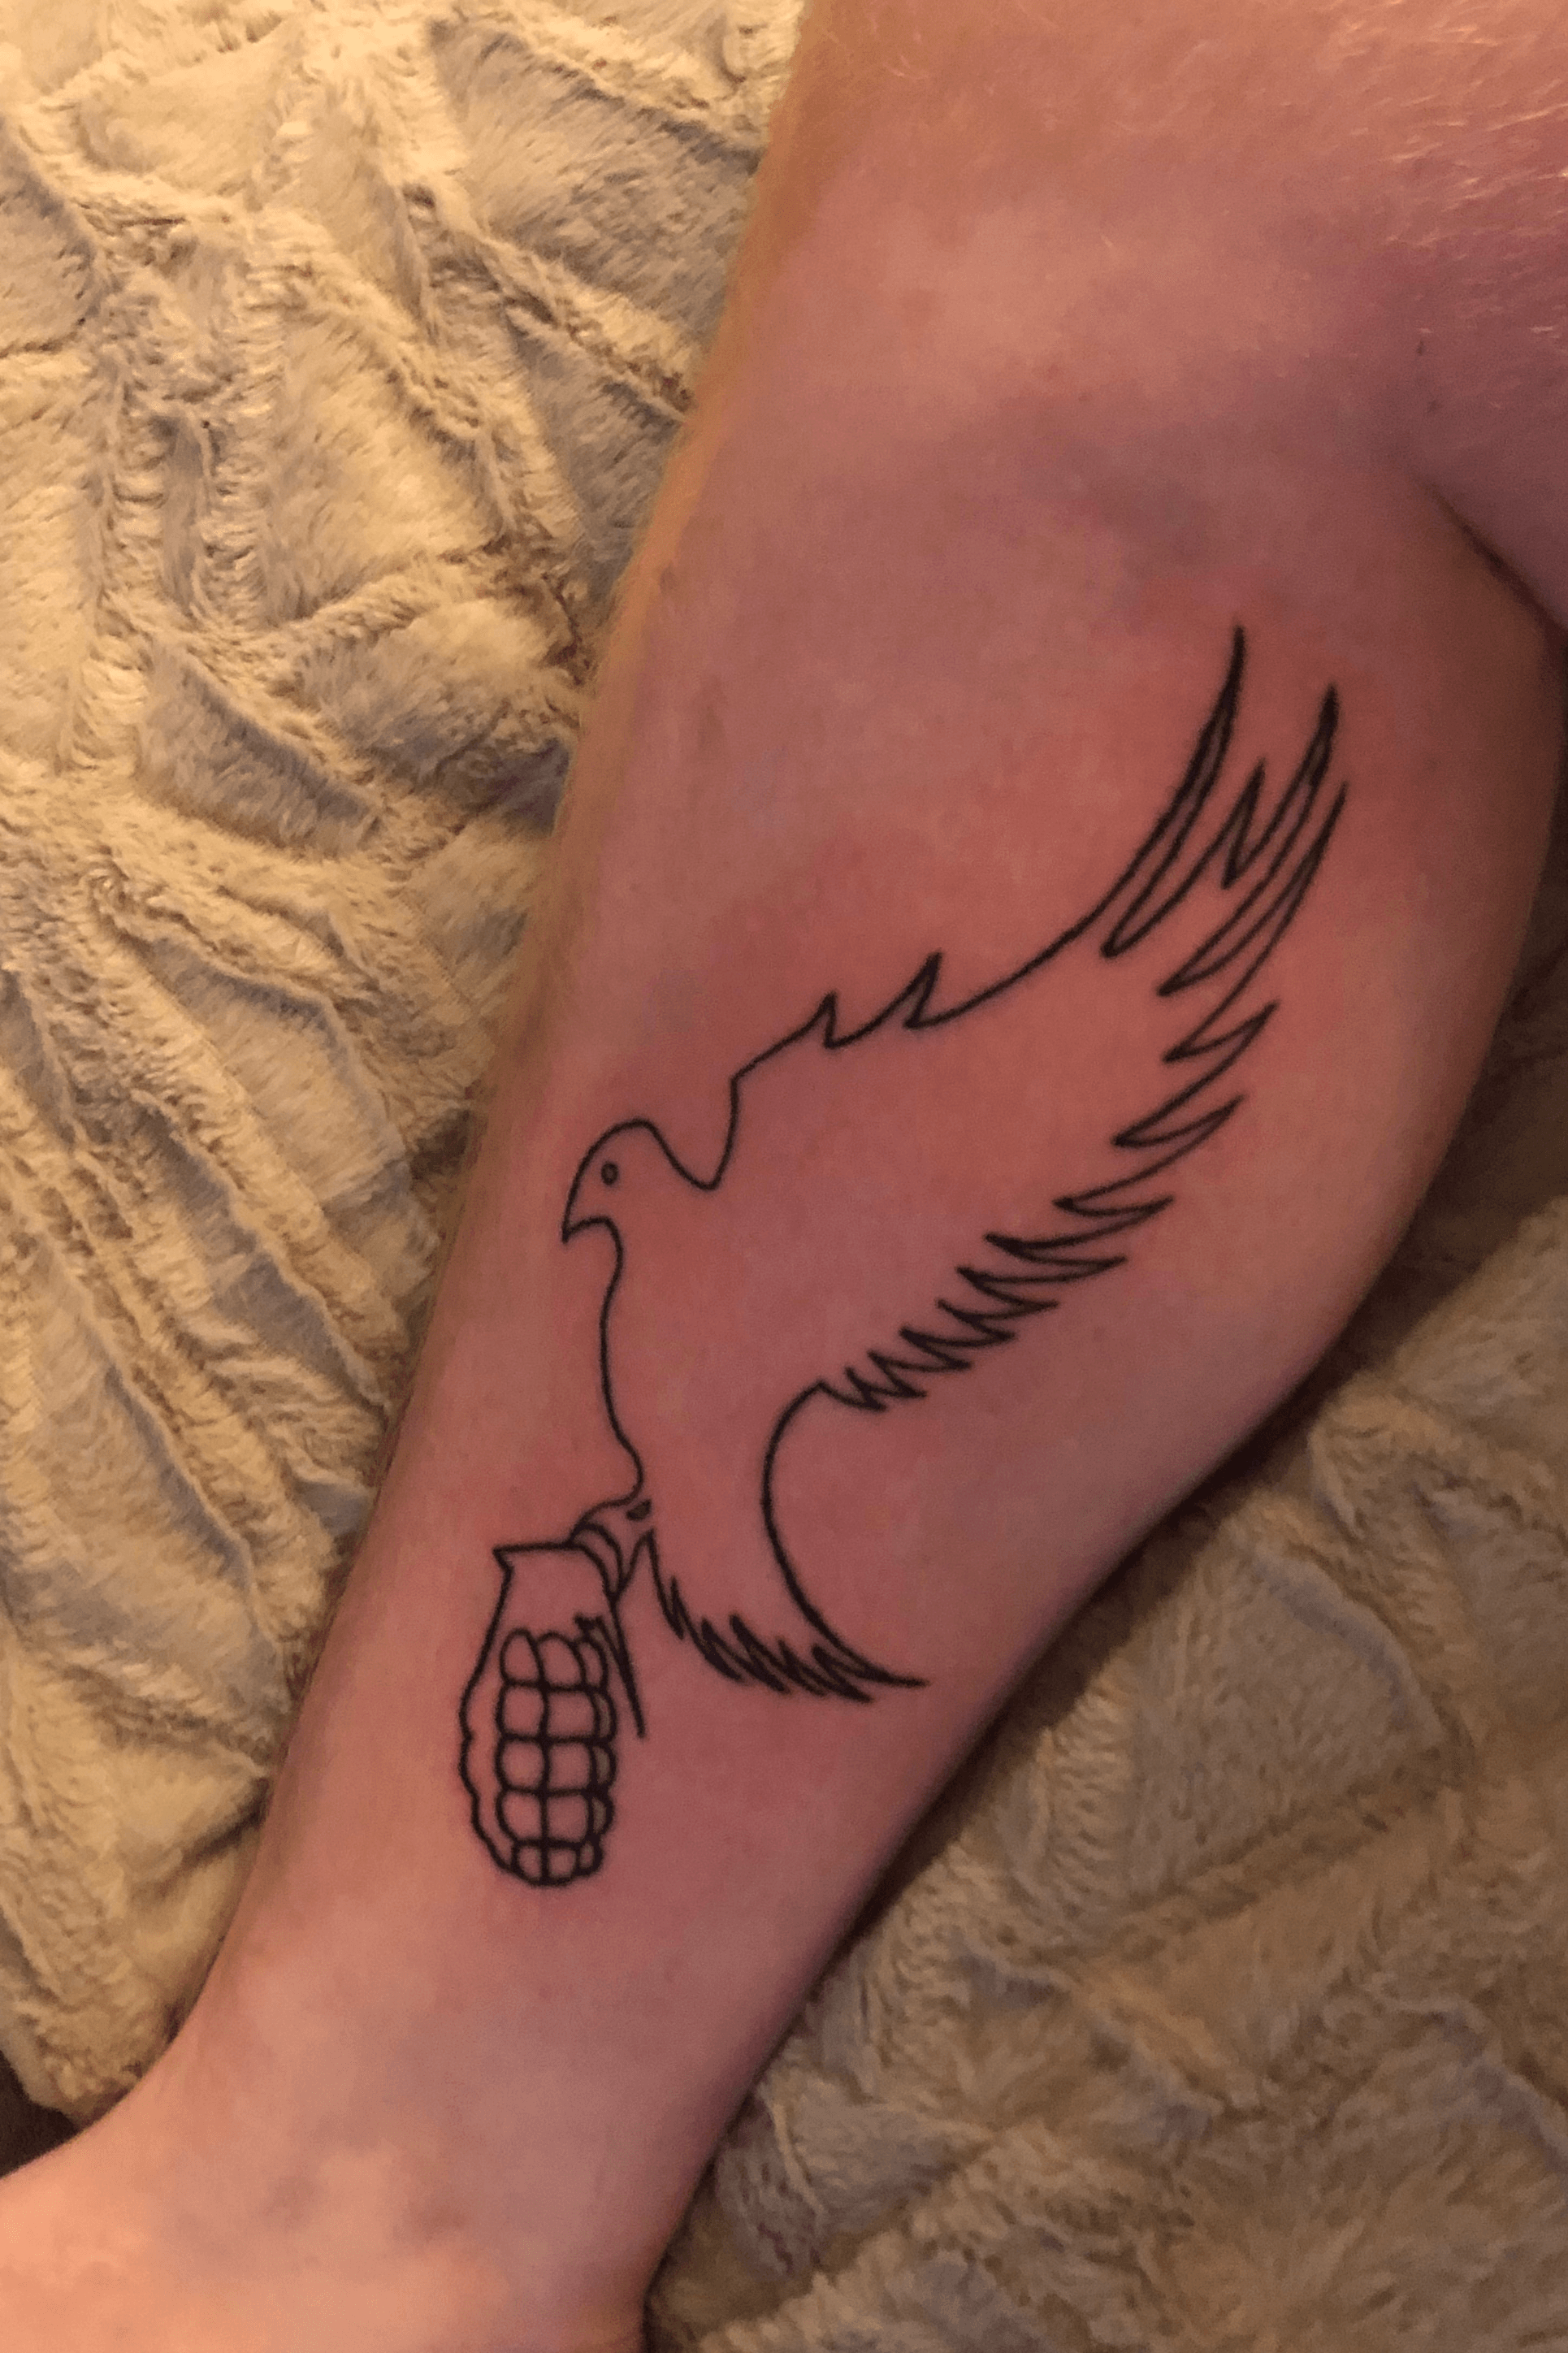 My first tattoo today Dove and Grenade Done by 160 at NeedleMasters  Toledo Ohio  rtattoos